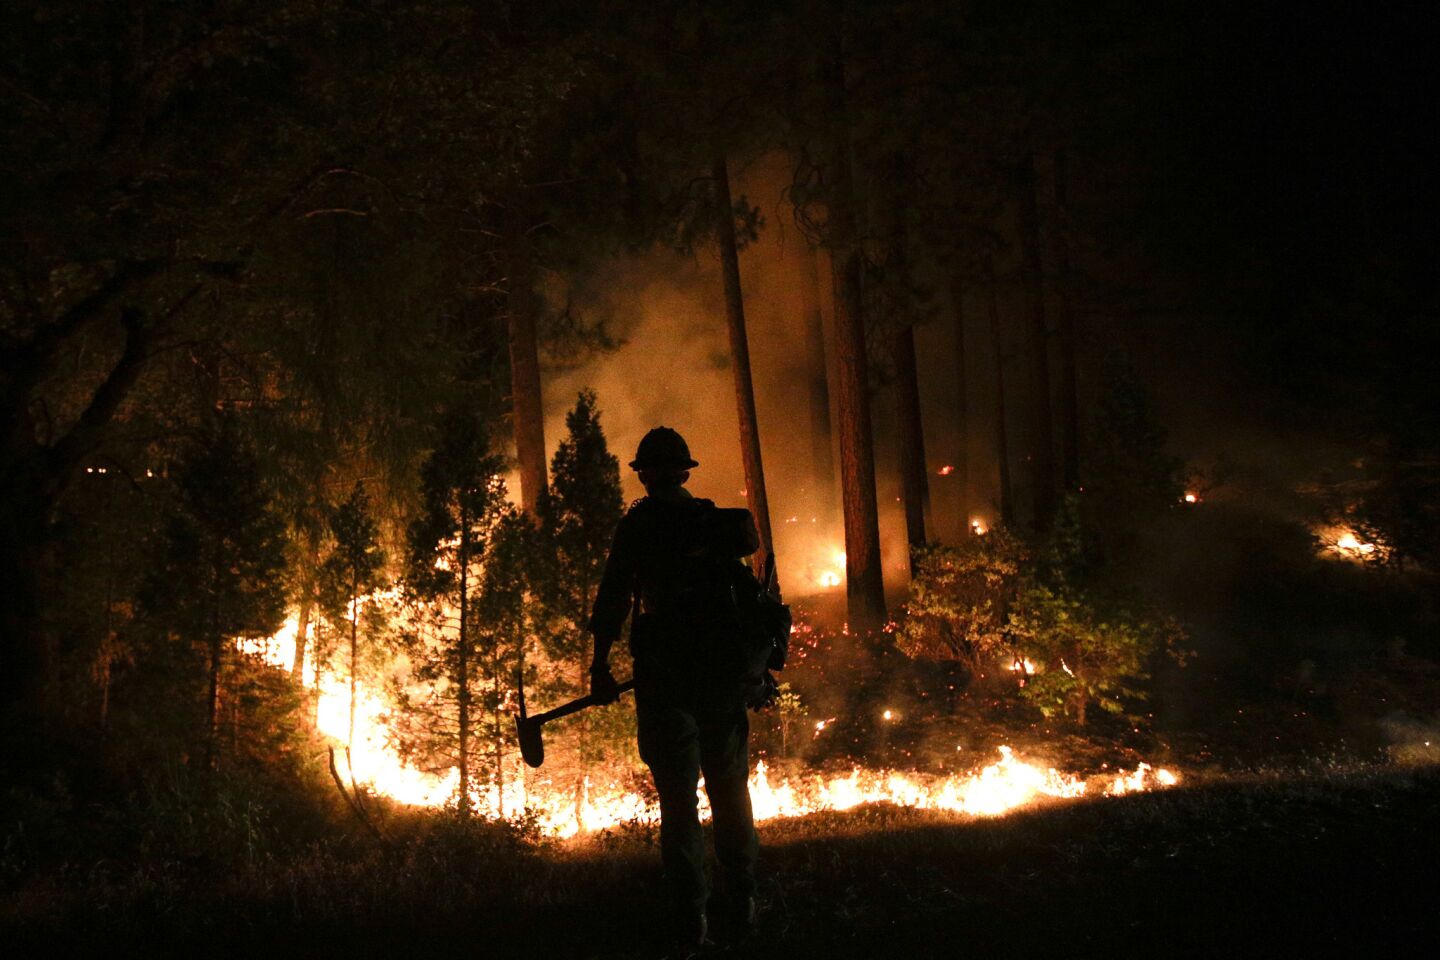 The Rim fire destroyed more than a quarter of a million acres in the Stanislaus National Forest and parts of Yosemite National Park. It was started by a hunter's illegal campfire; authorities have still not made an arrest or revealed the results of their investigation, even though the fire started in August. What gives? Above: A firefighter watches the Rim fire burn near Yosemite National Park in August. MORE YEAR IN REVIEW: Ted Rall's five best cartoons of 2013 Washington's 5 biggest 'fails' of 2013 10 tips for a better life from The Times' Op-Ed pages in 2013